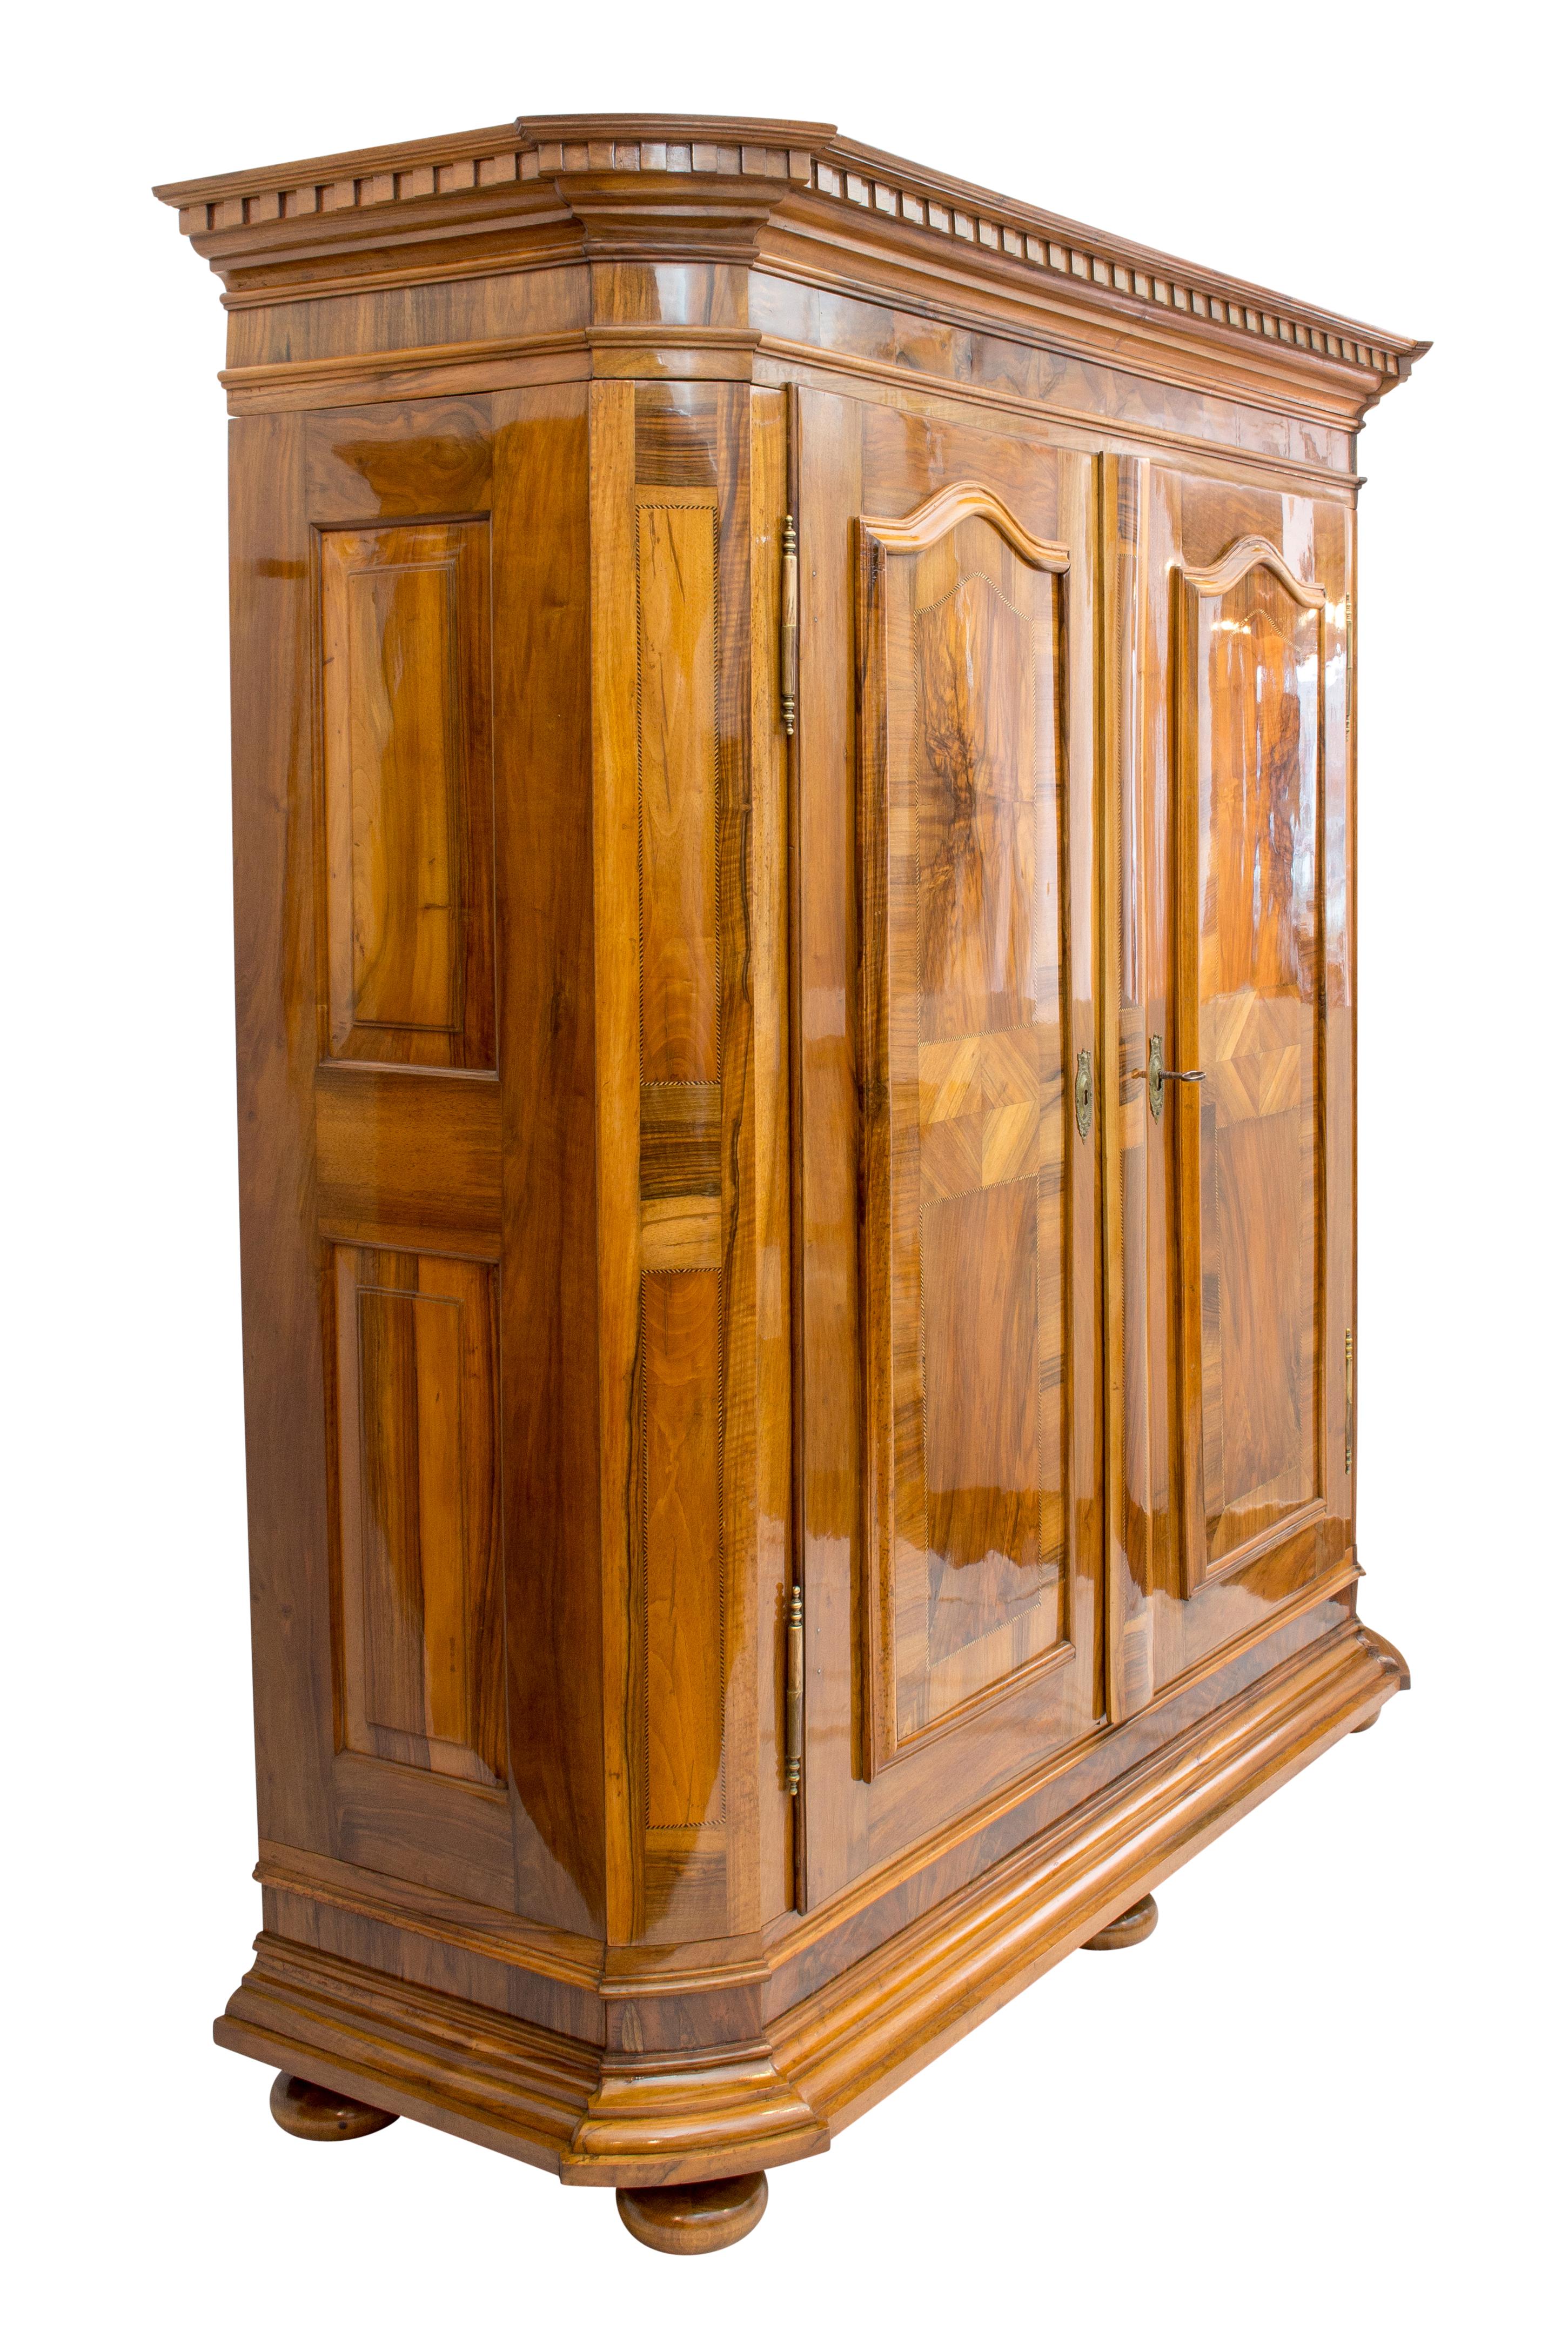 Significant Palatinate Baroque cabinet from West Germany / border area to France. The cabinet dates back to the Baroque period circa 1750 and was made of solid walnut wood and veneered. The front is decorated with fillet ribbons and a contrasting